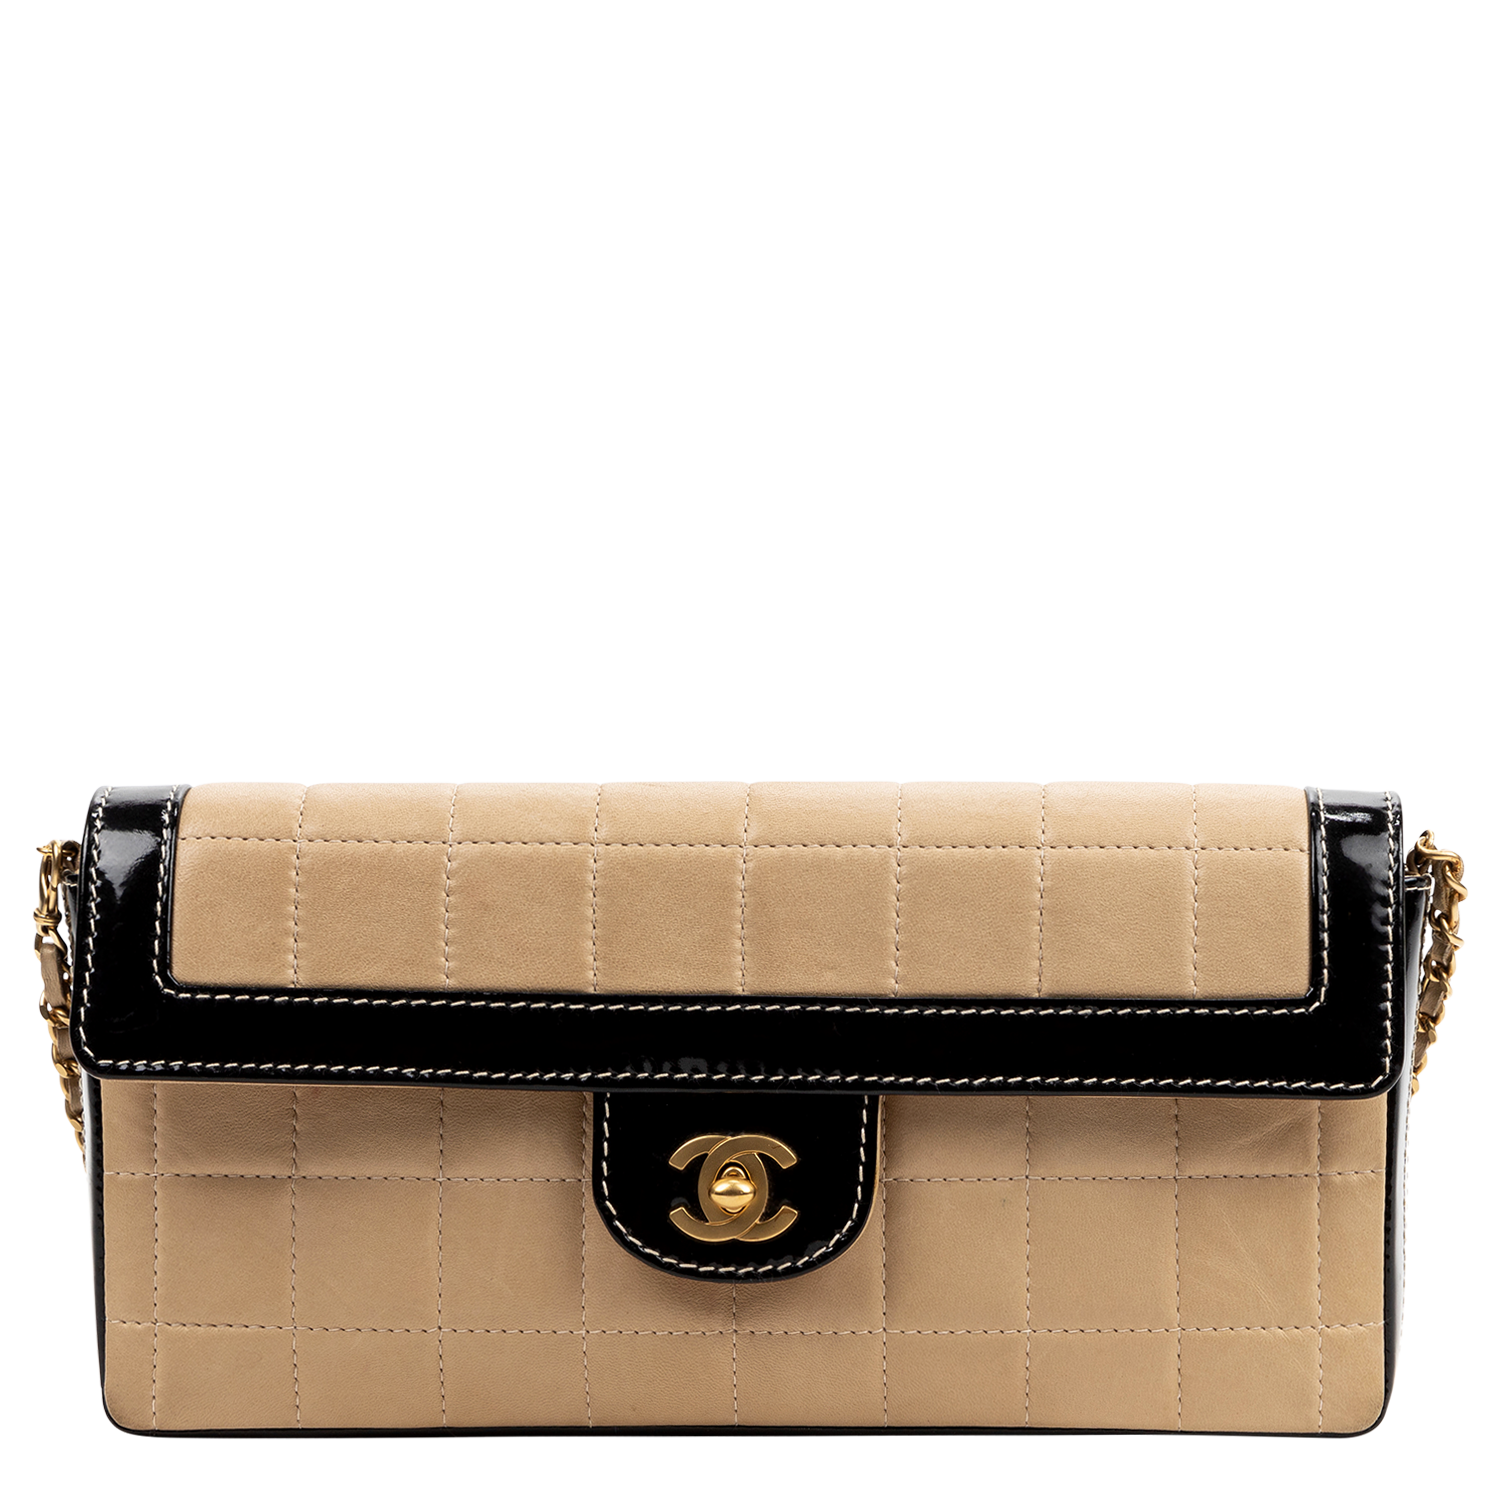 East west chocolate bar leather tote Chanel Beige in Leather